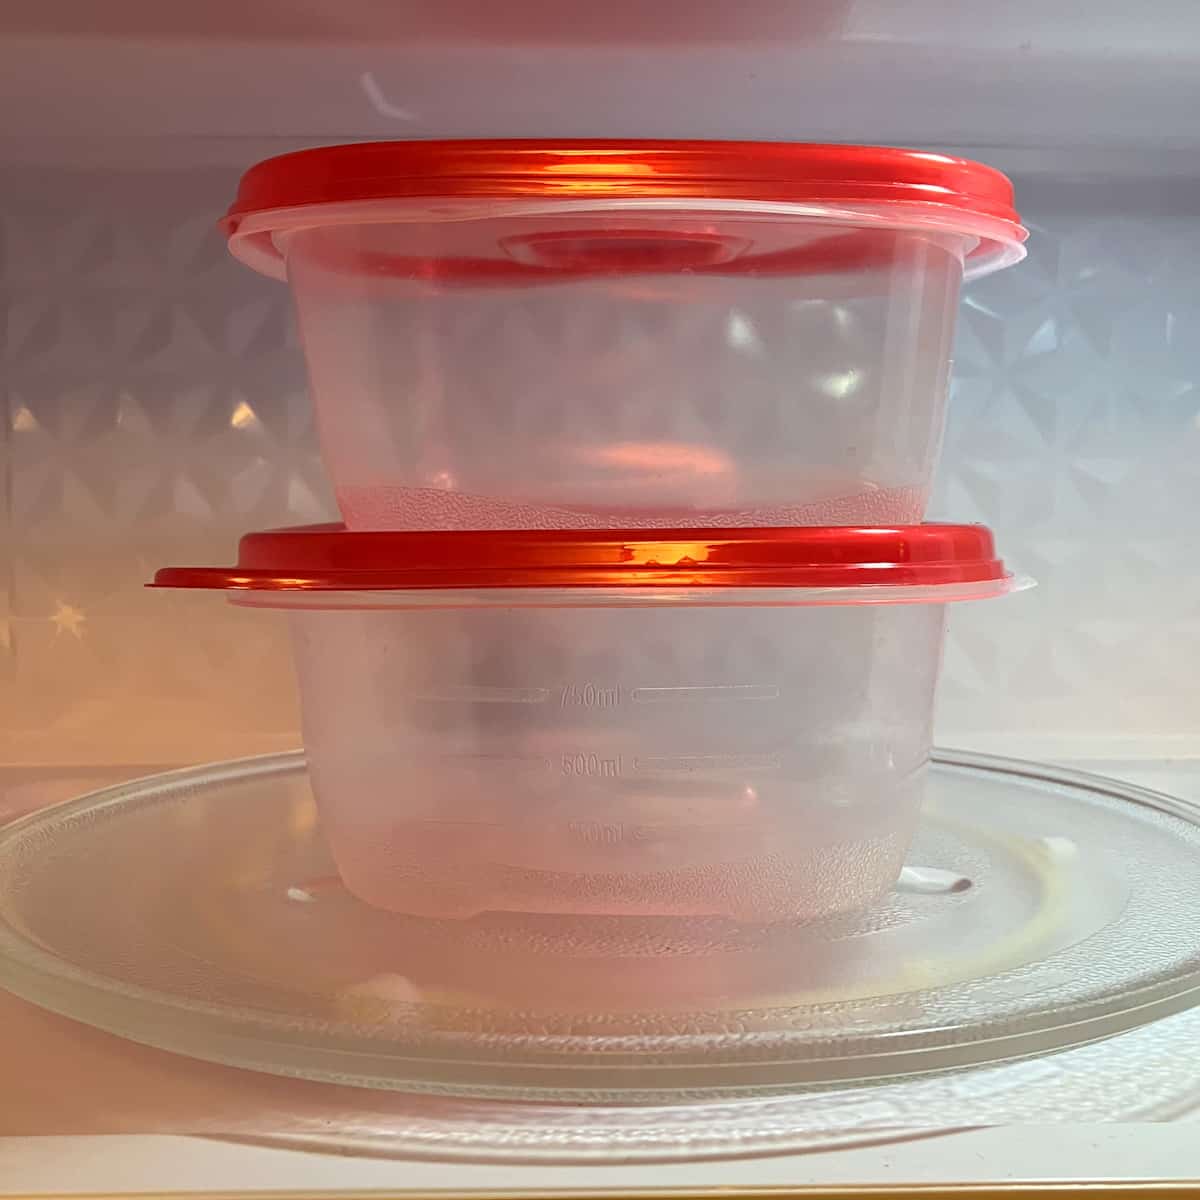 How To Tell If Your Tupperware Is Dishwasher Safe